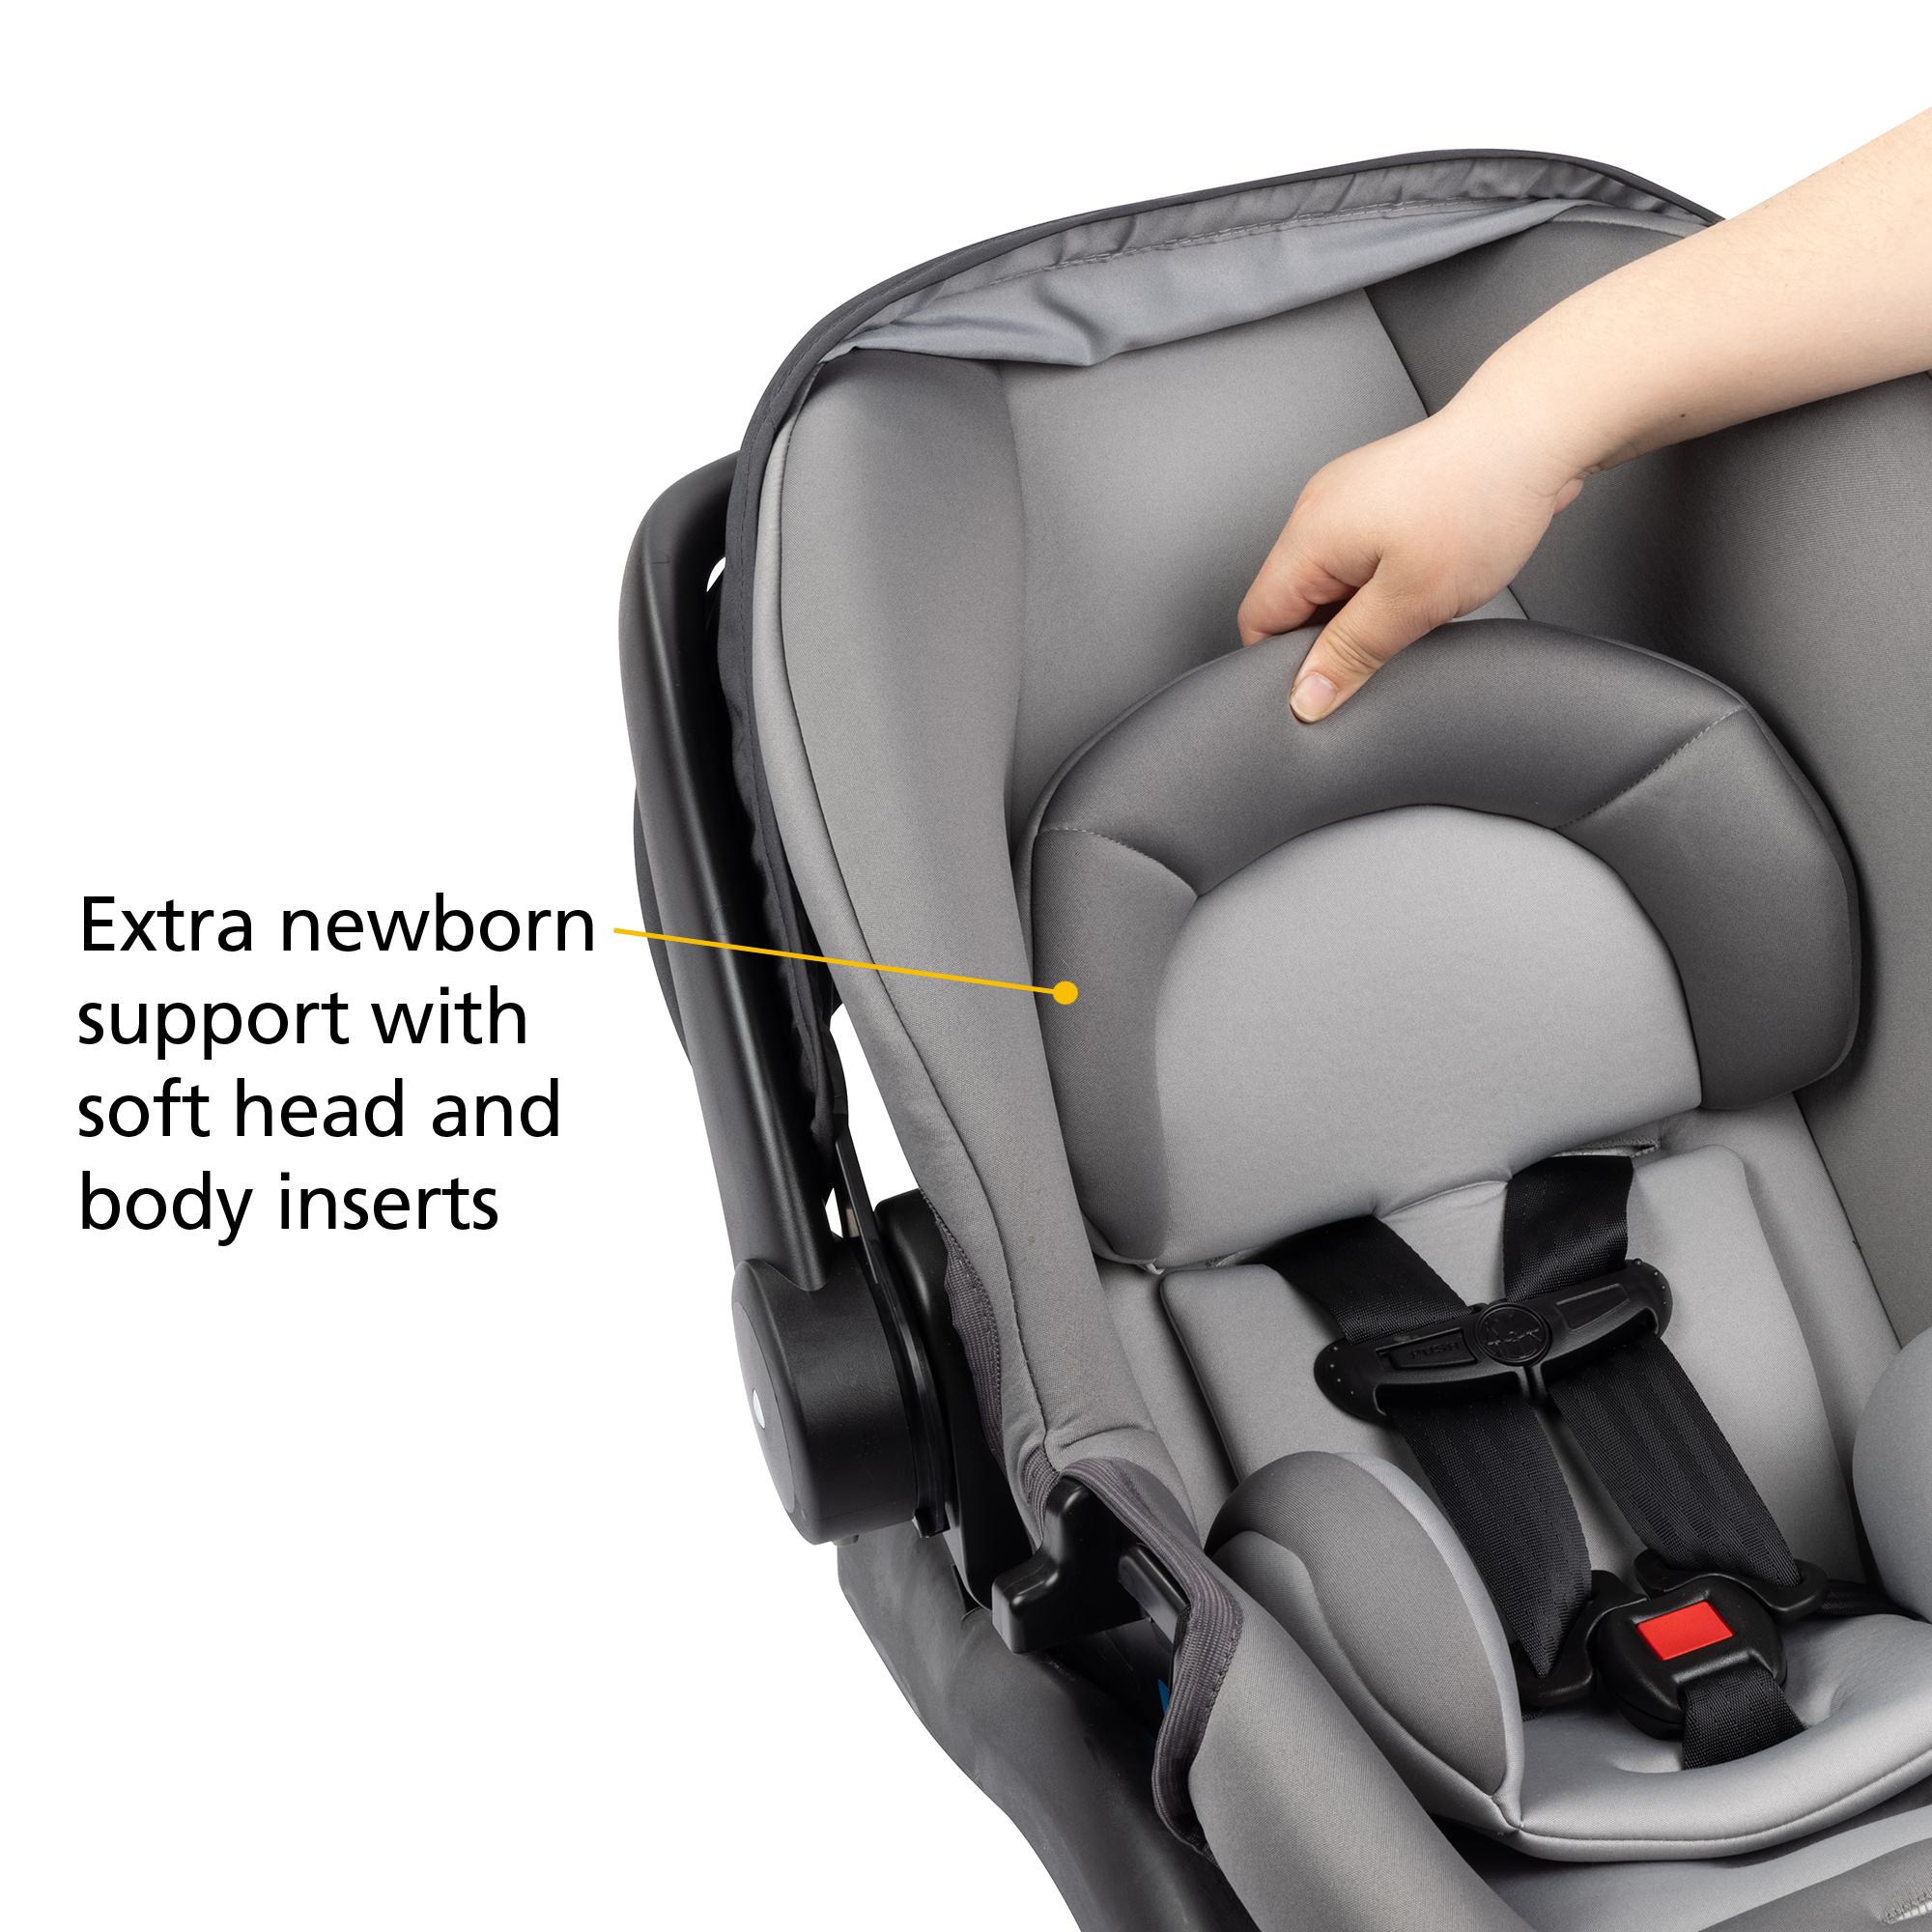 onBoard™35 SecureTech™ Infant Car Seat - lightweight and easy to carry at less than 8 pounds